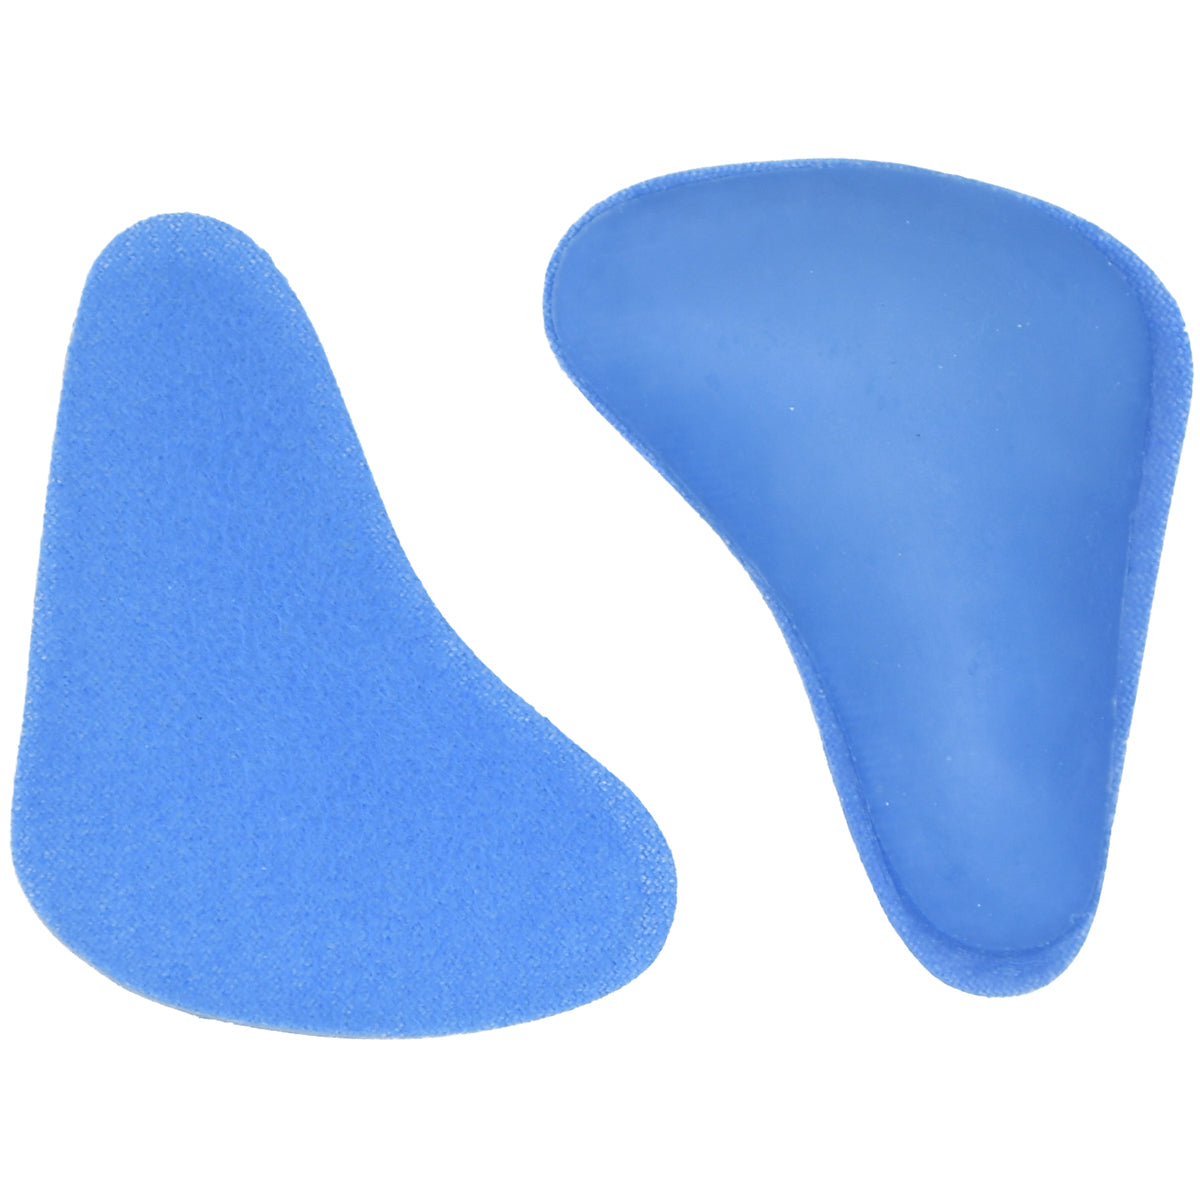 Soft Stride Pain Relief Metatarsal Pads with Top Covers Soft Stride